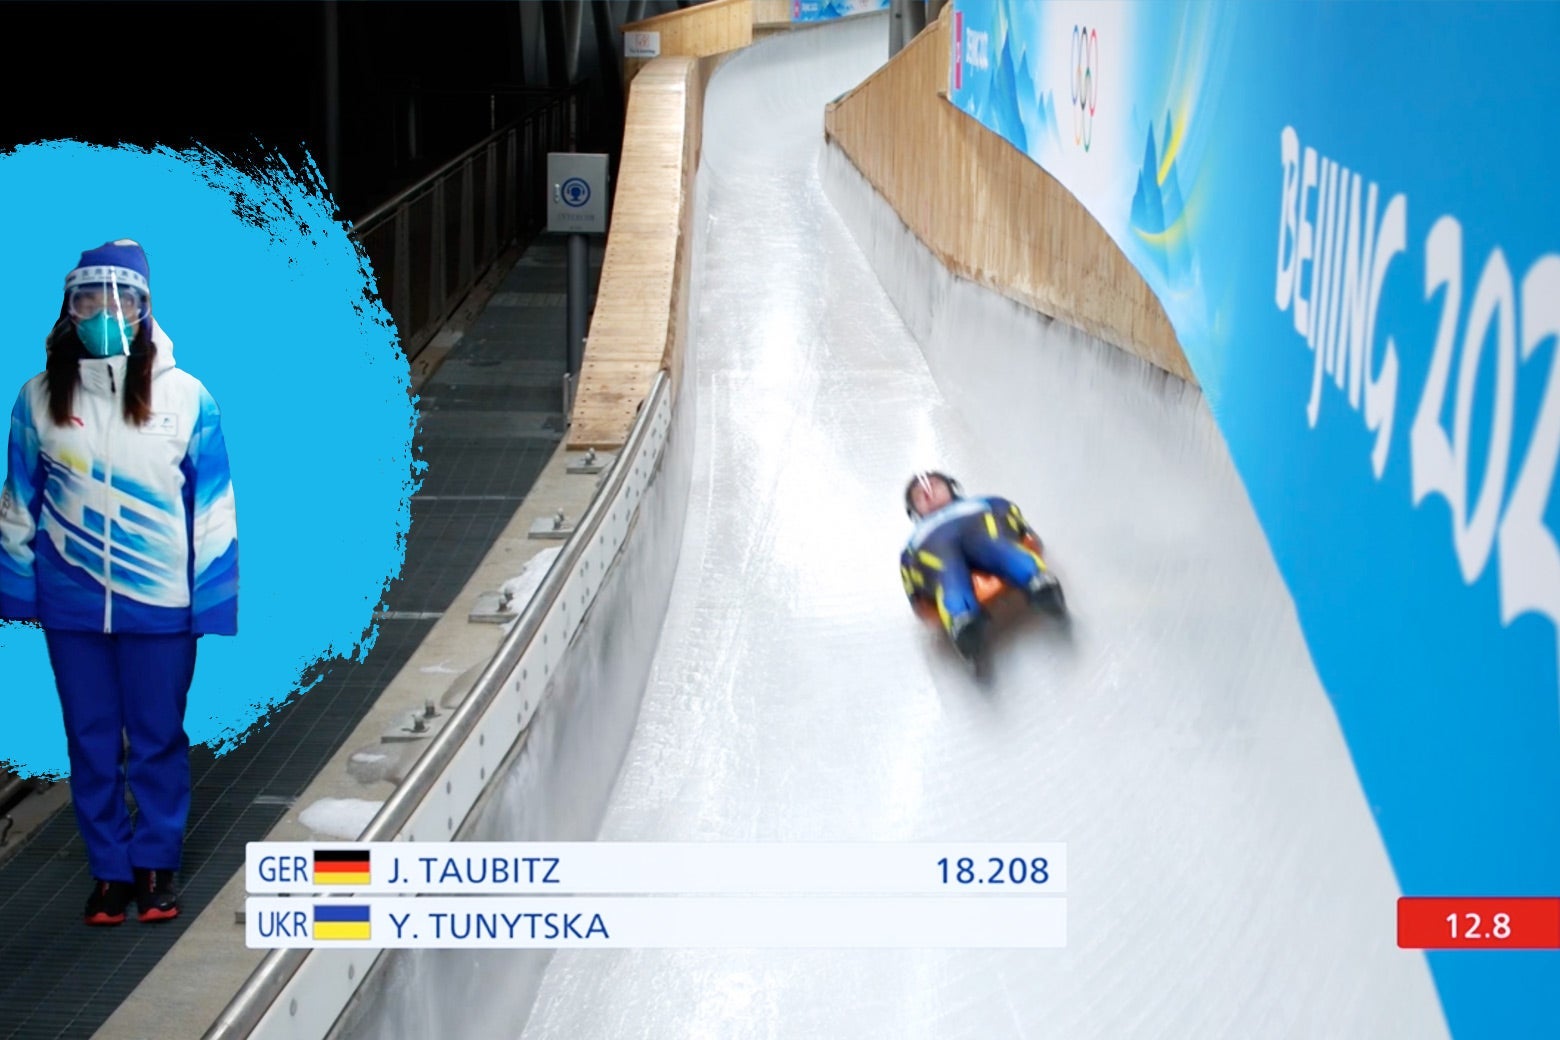 The luge track patroller highlighted beside the track as a luge competitor zooms down the track next to her.